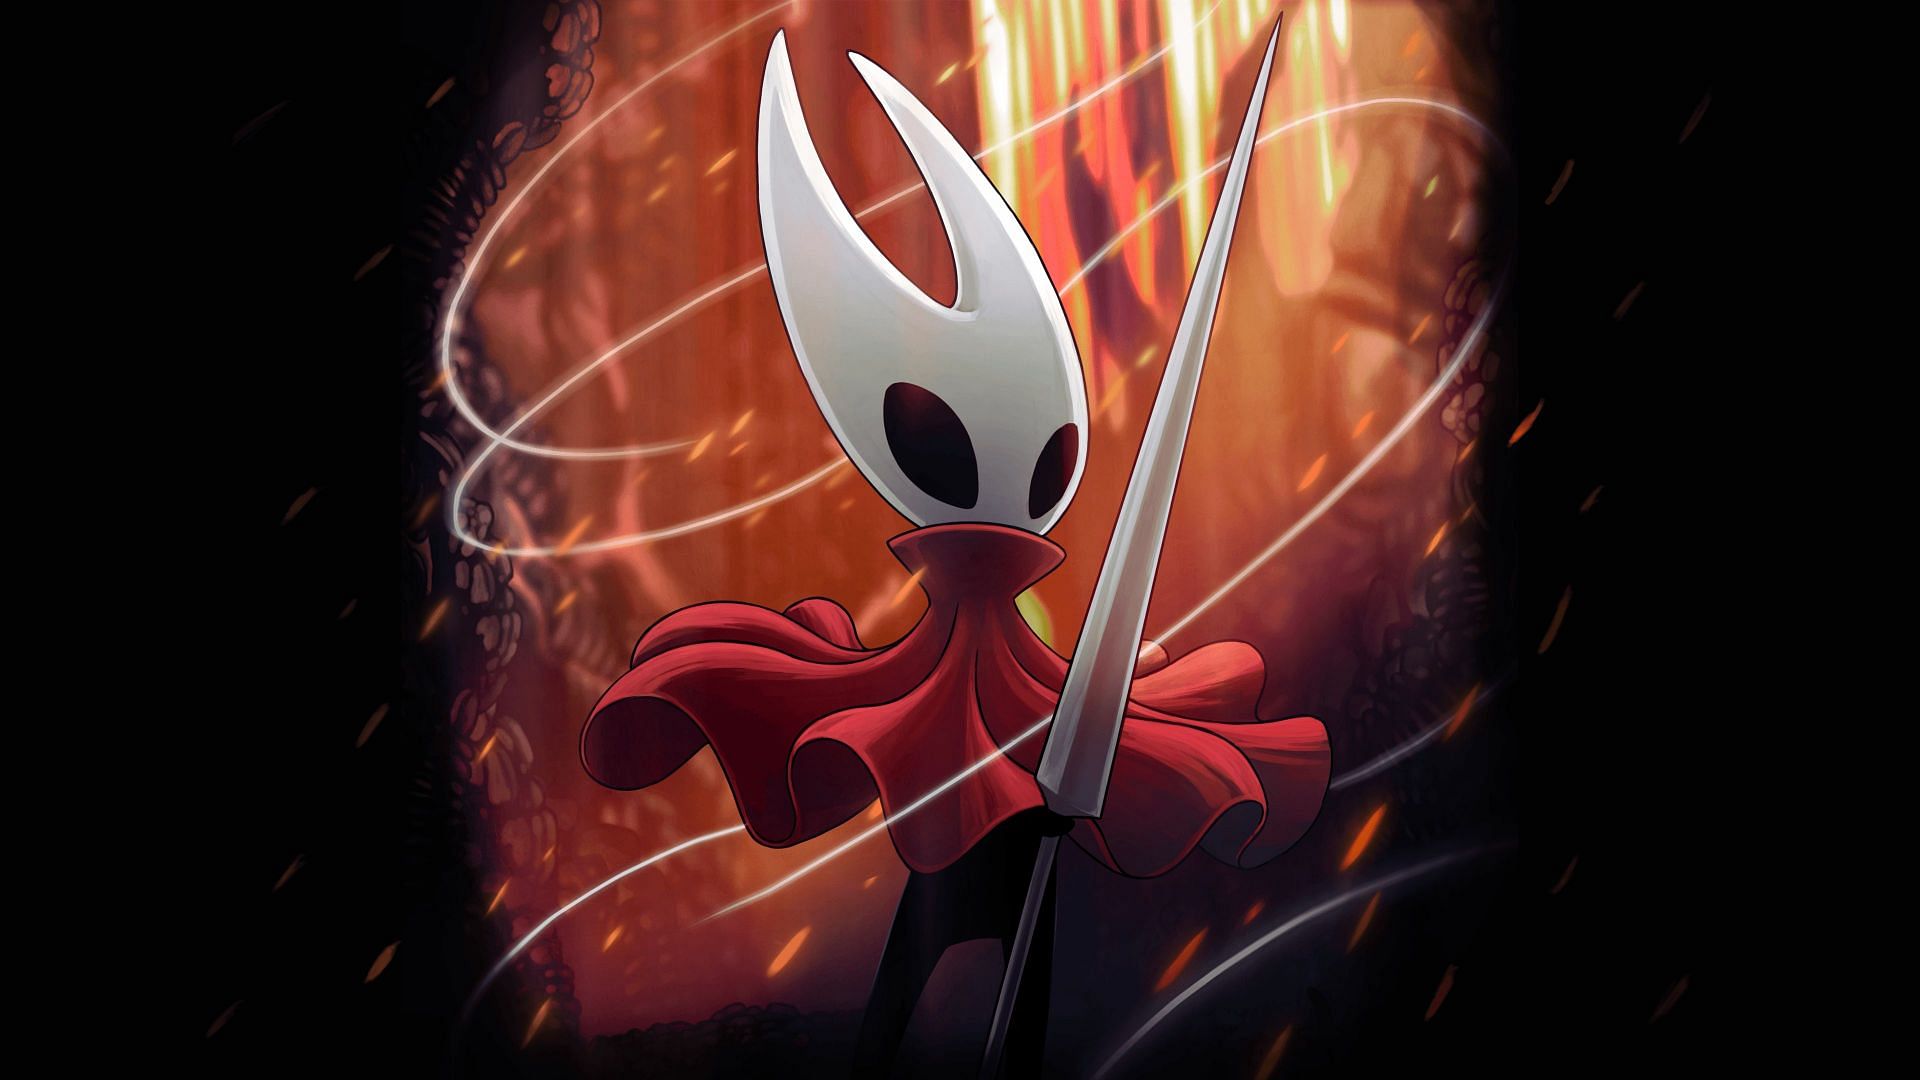 Hollow Knight: Silksong was finally shown at the Xbox Bethesda Games Showcase (Image via Team Cherry)